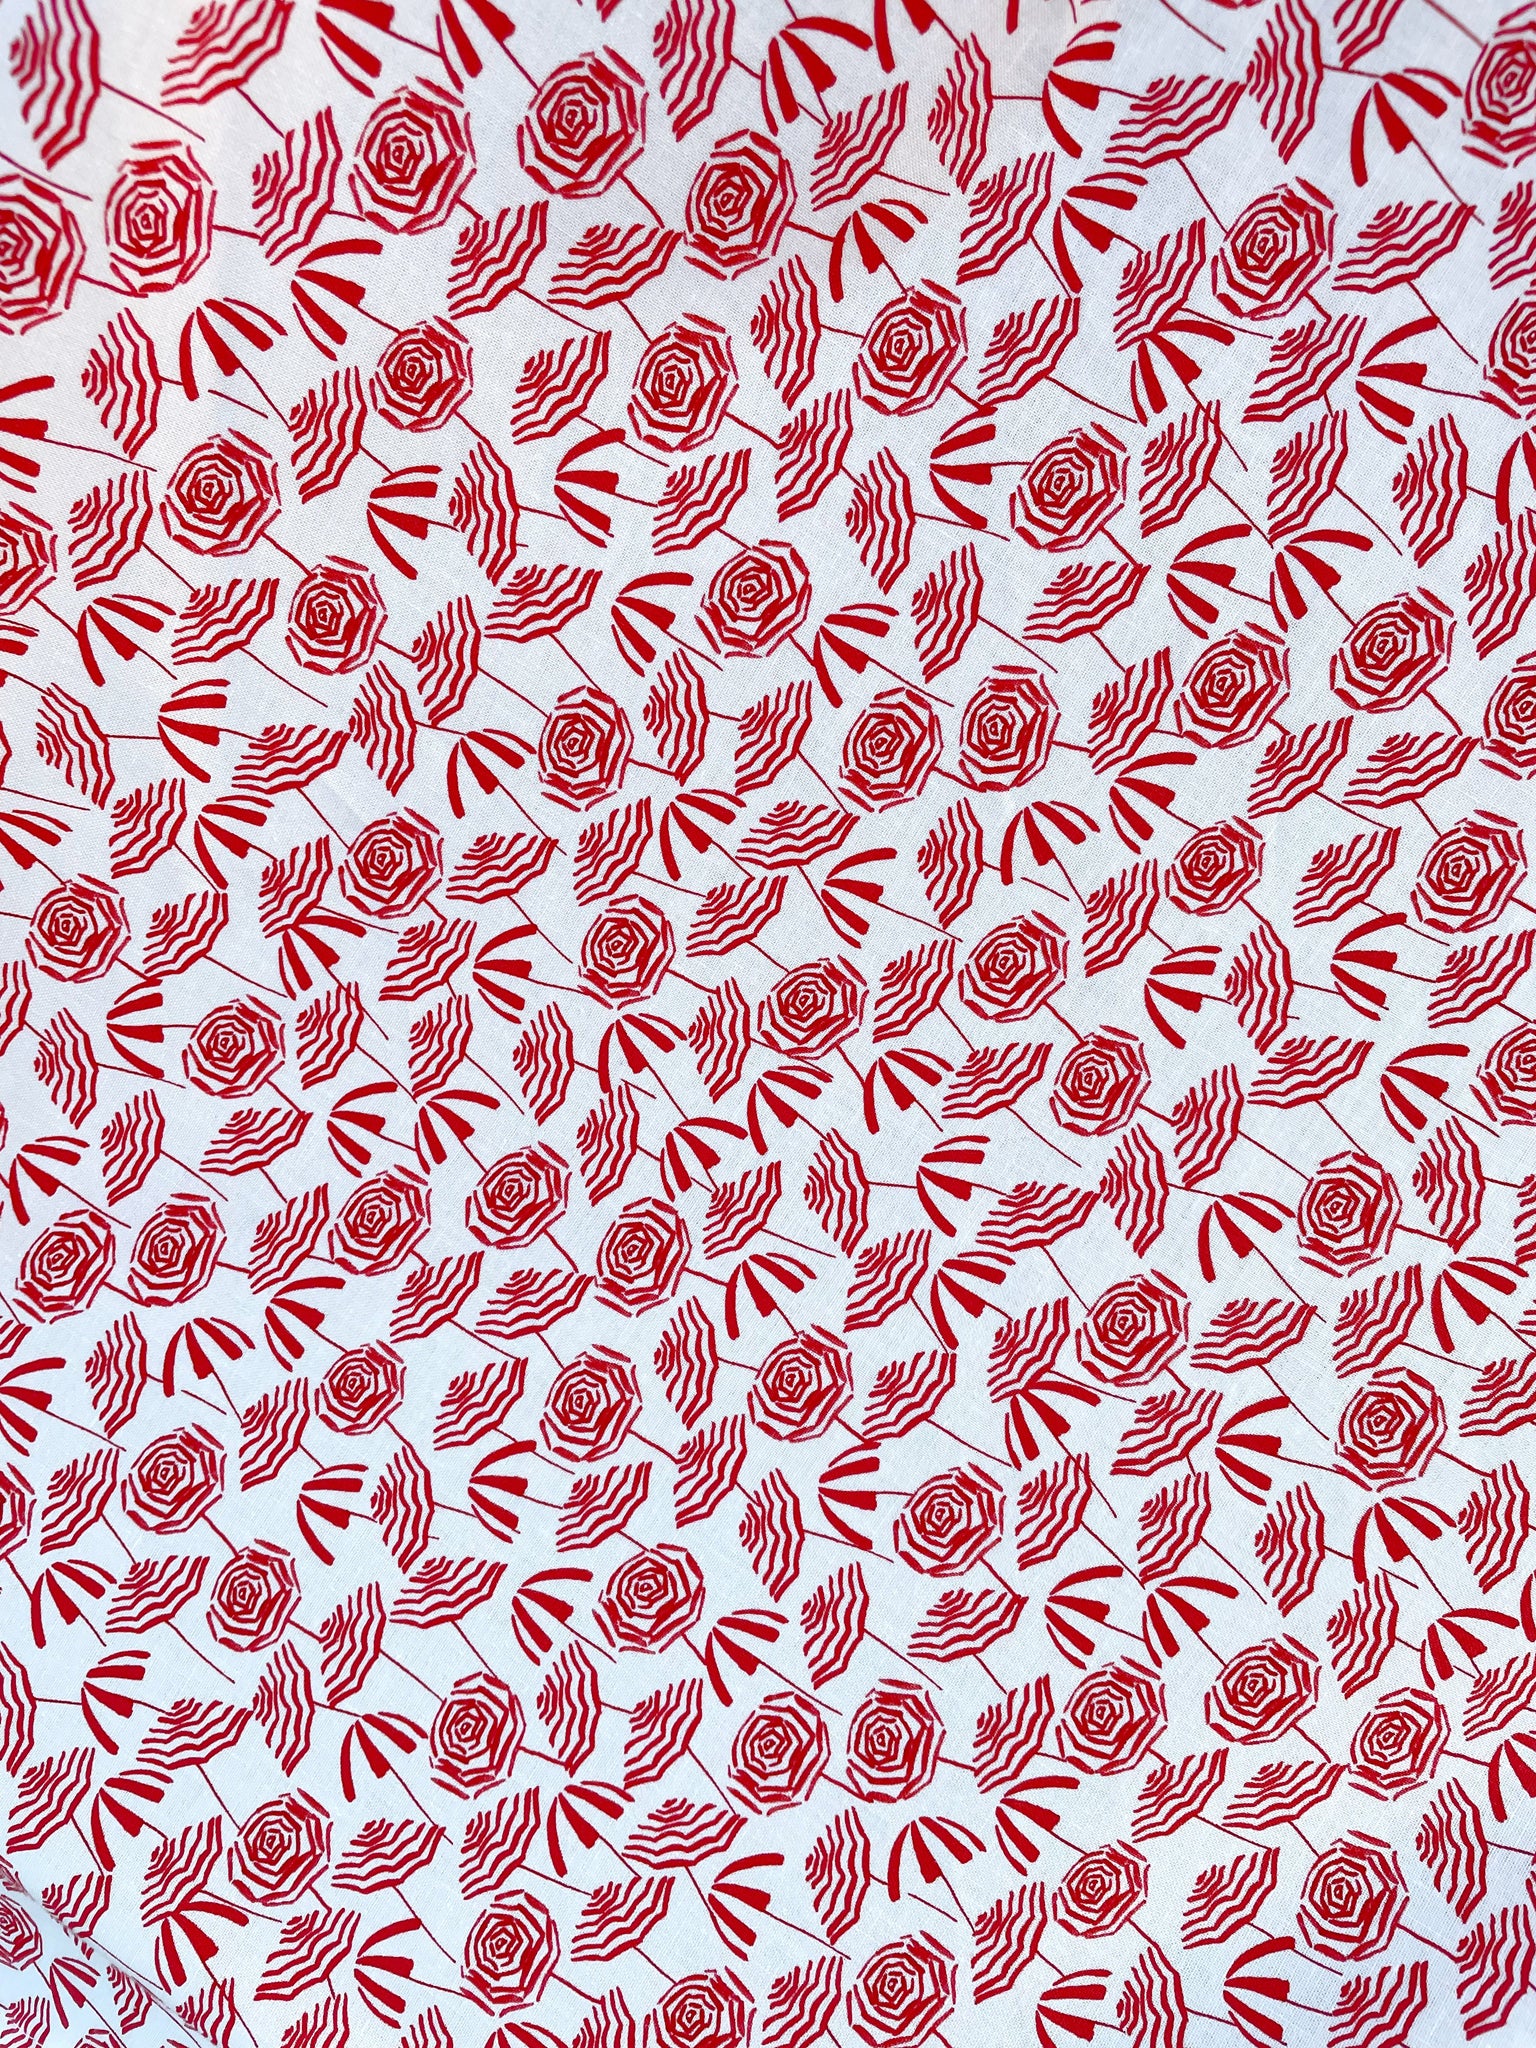 a close up of the fabric with red umbrellas on white background